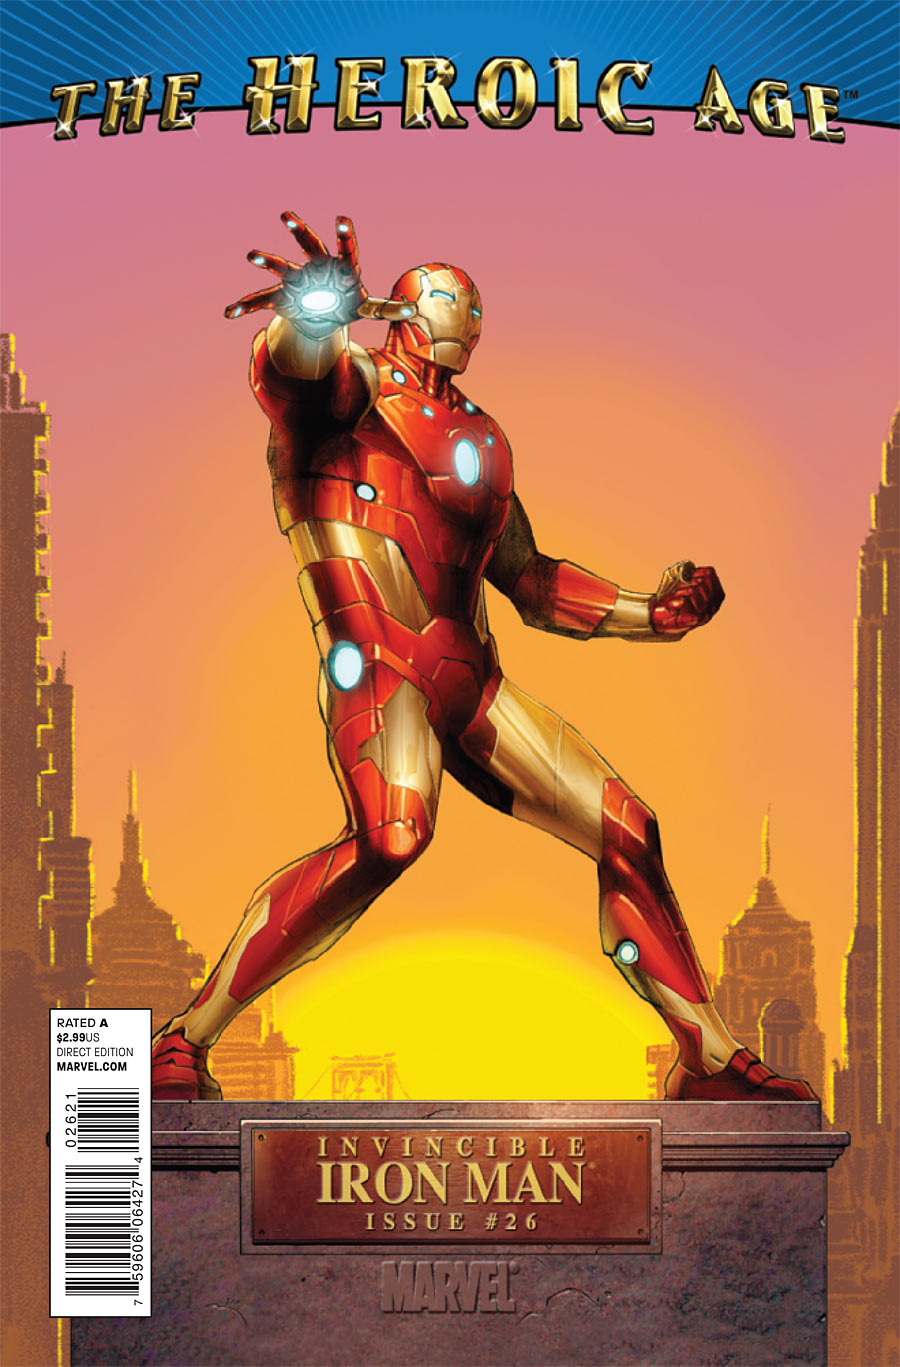 Invincible Iron Man #26 (Heroic Age Variant Cover)